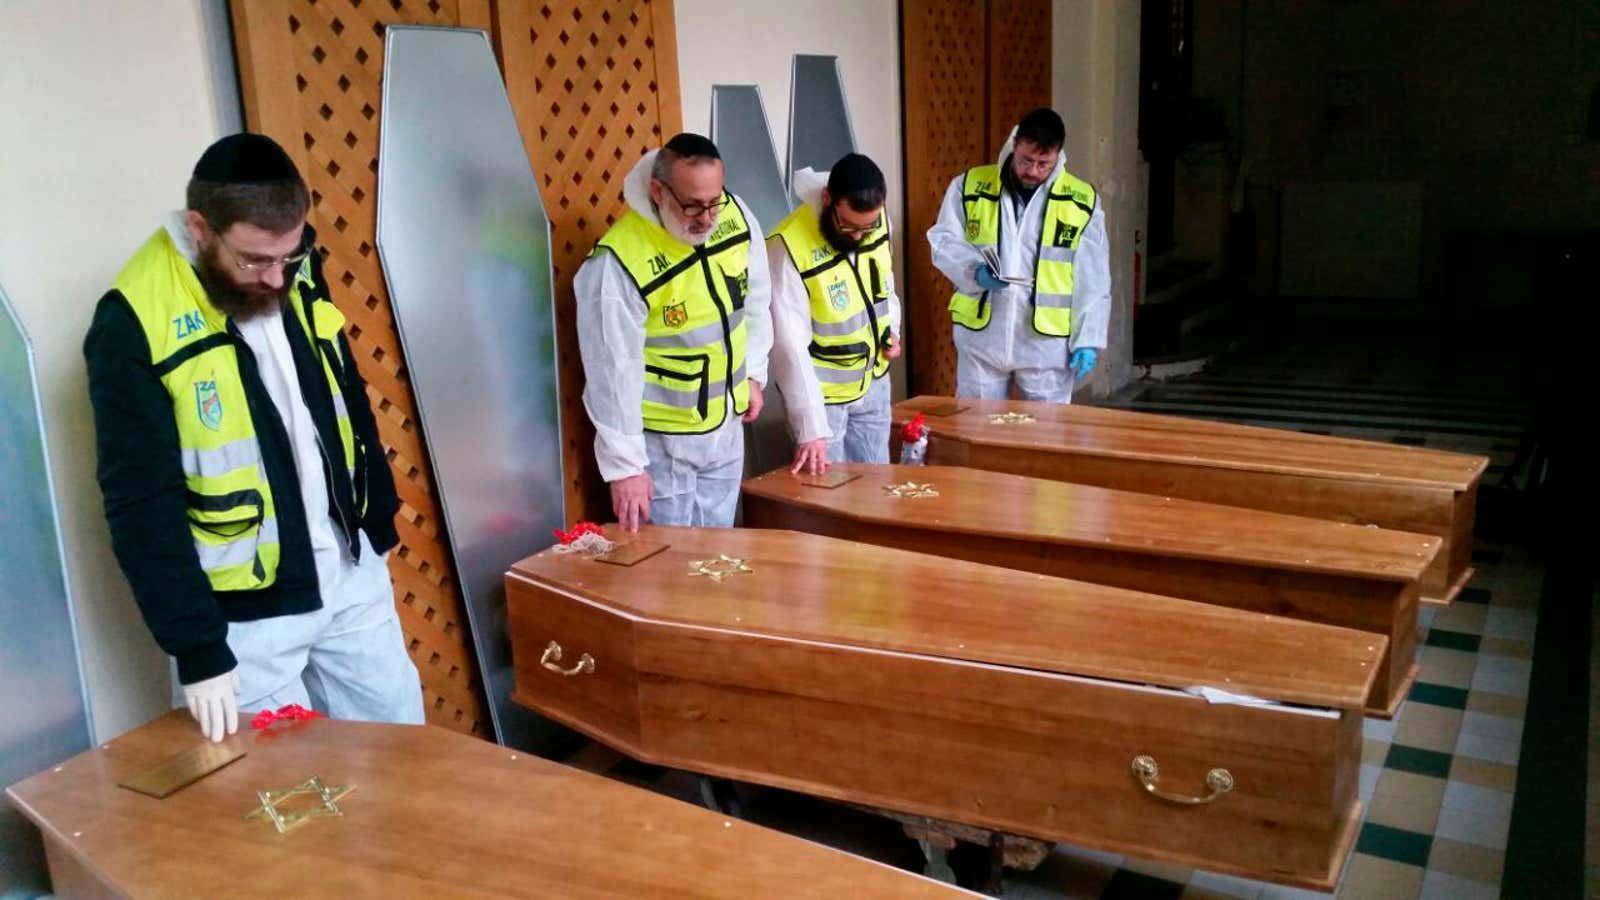 Members of the Zaka emergency response team pray beside the coffins of four victims of an attack at a kosher supermarket in Paris.